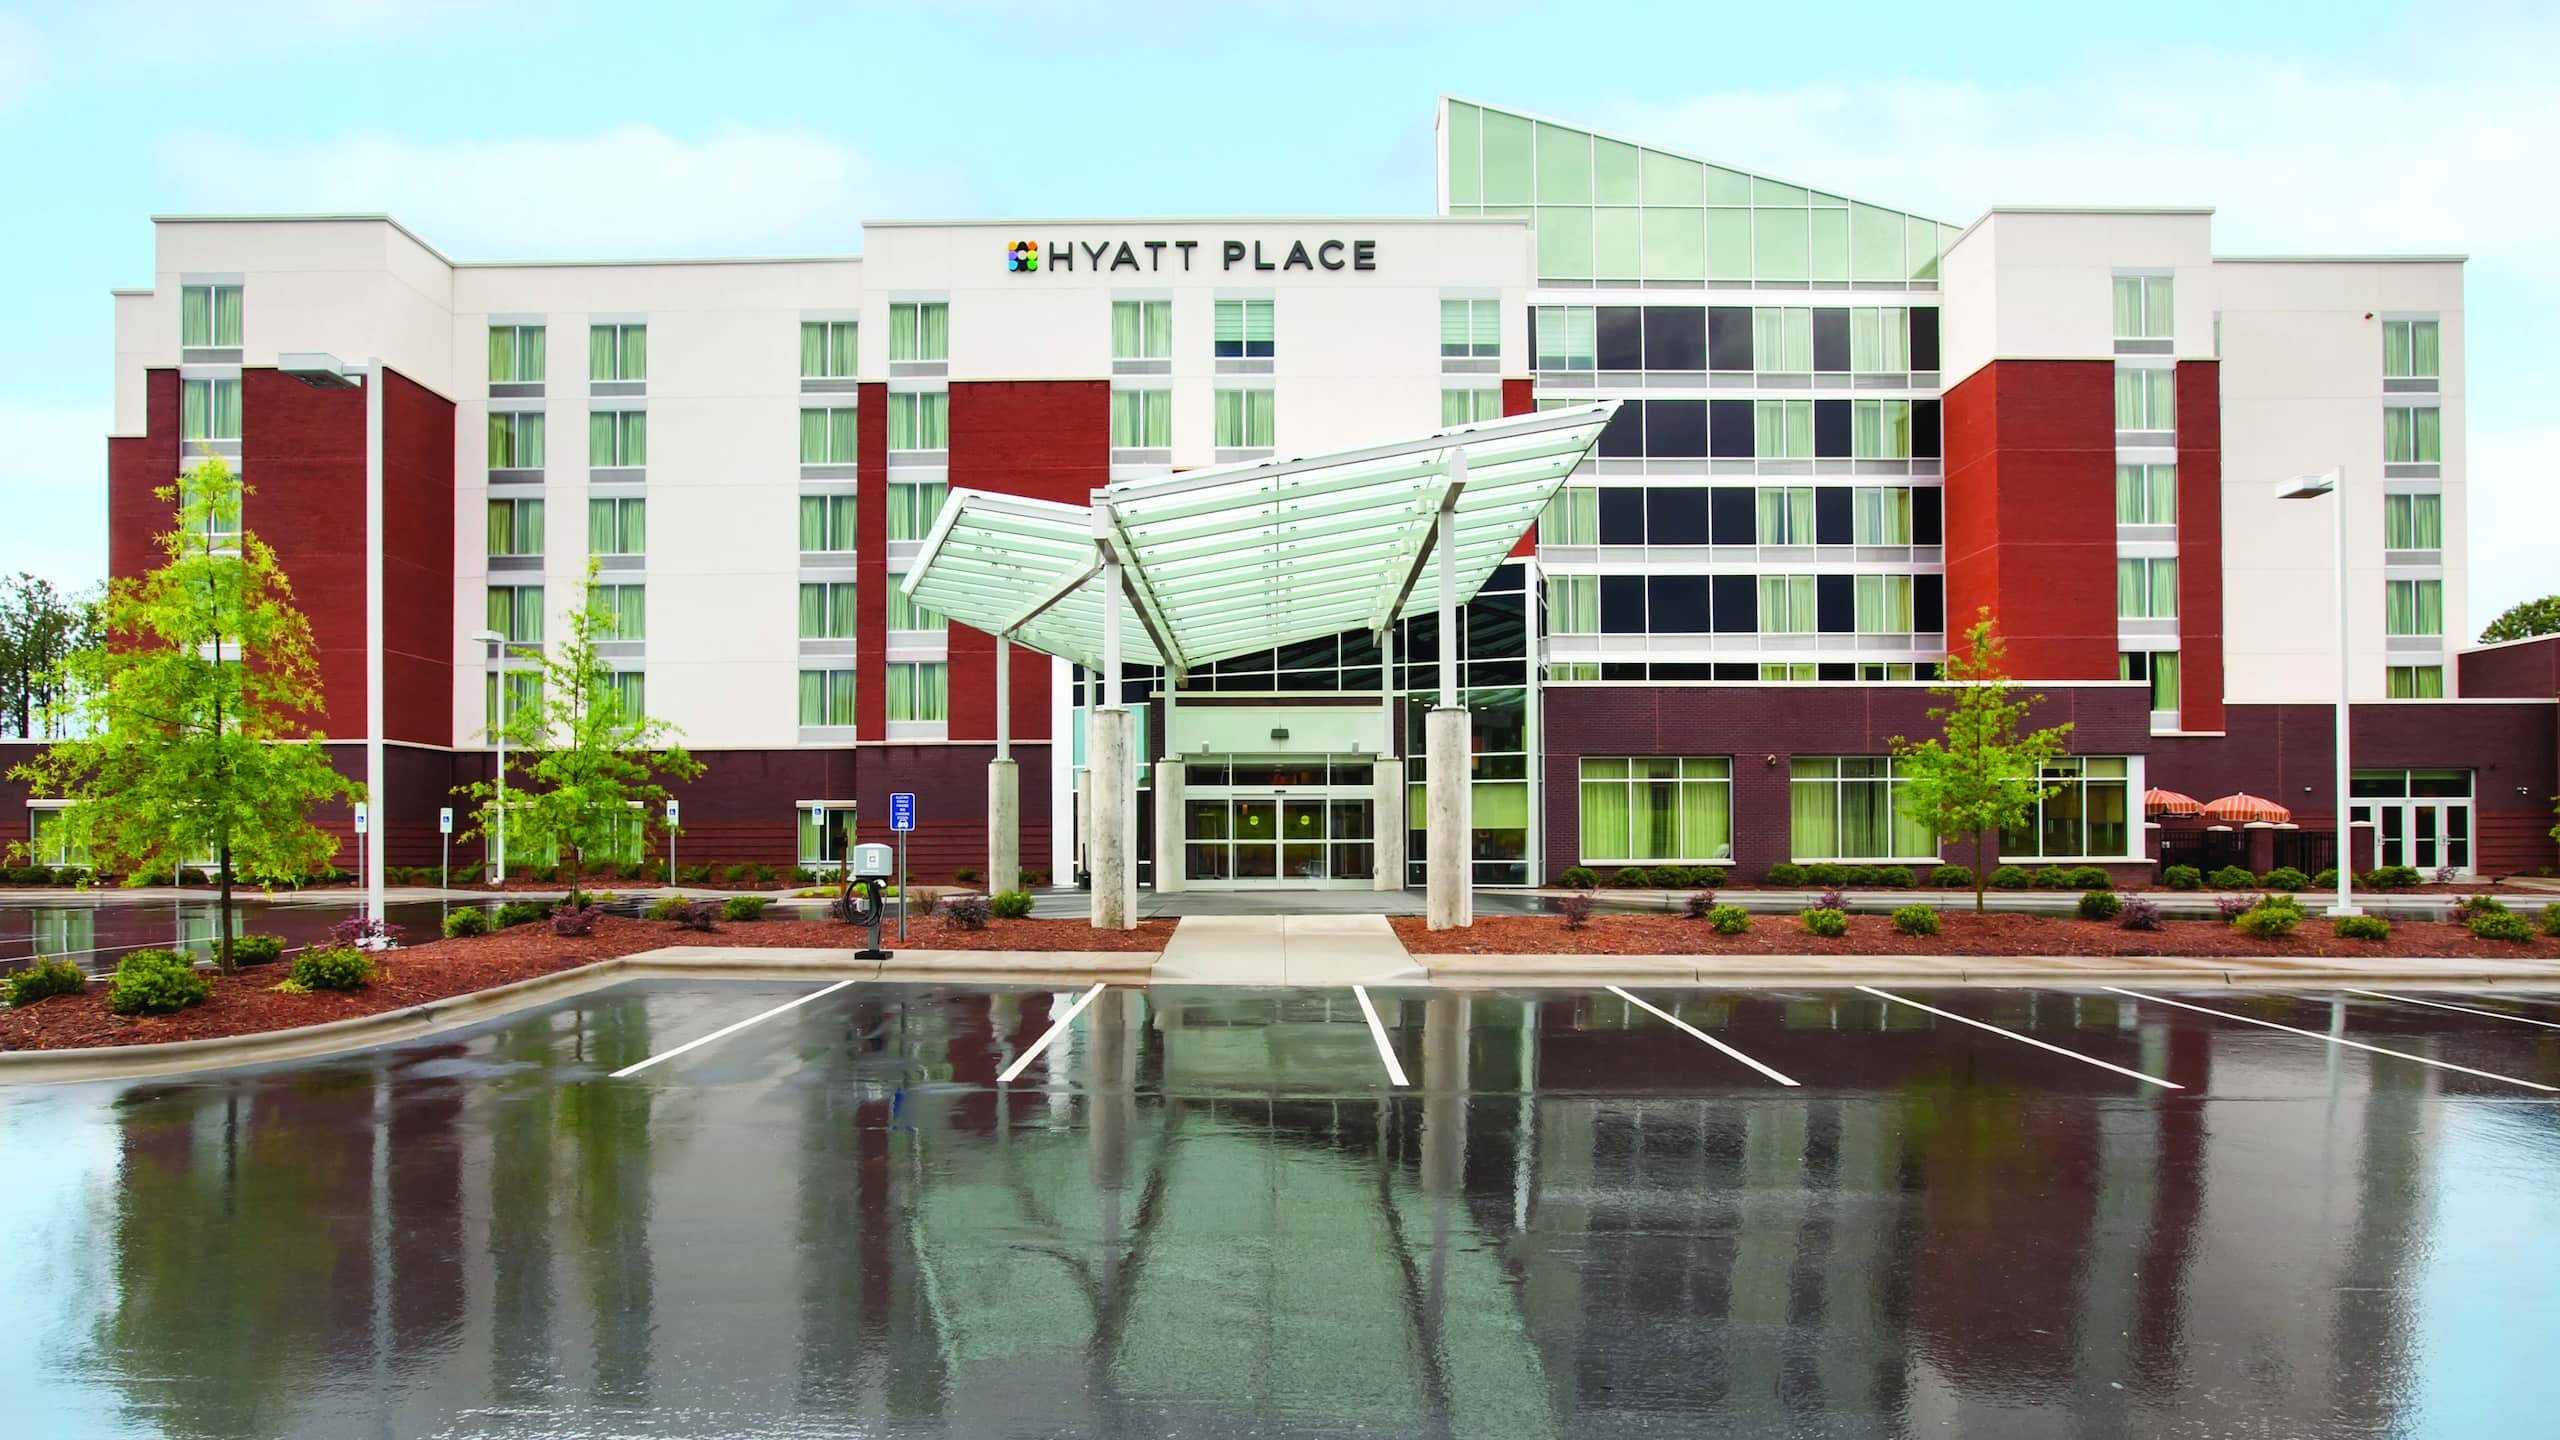 Photo of Hyatt Place Raleigh / Cary, Raleigh, NC